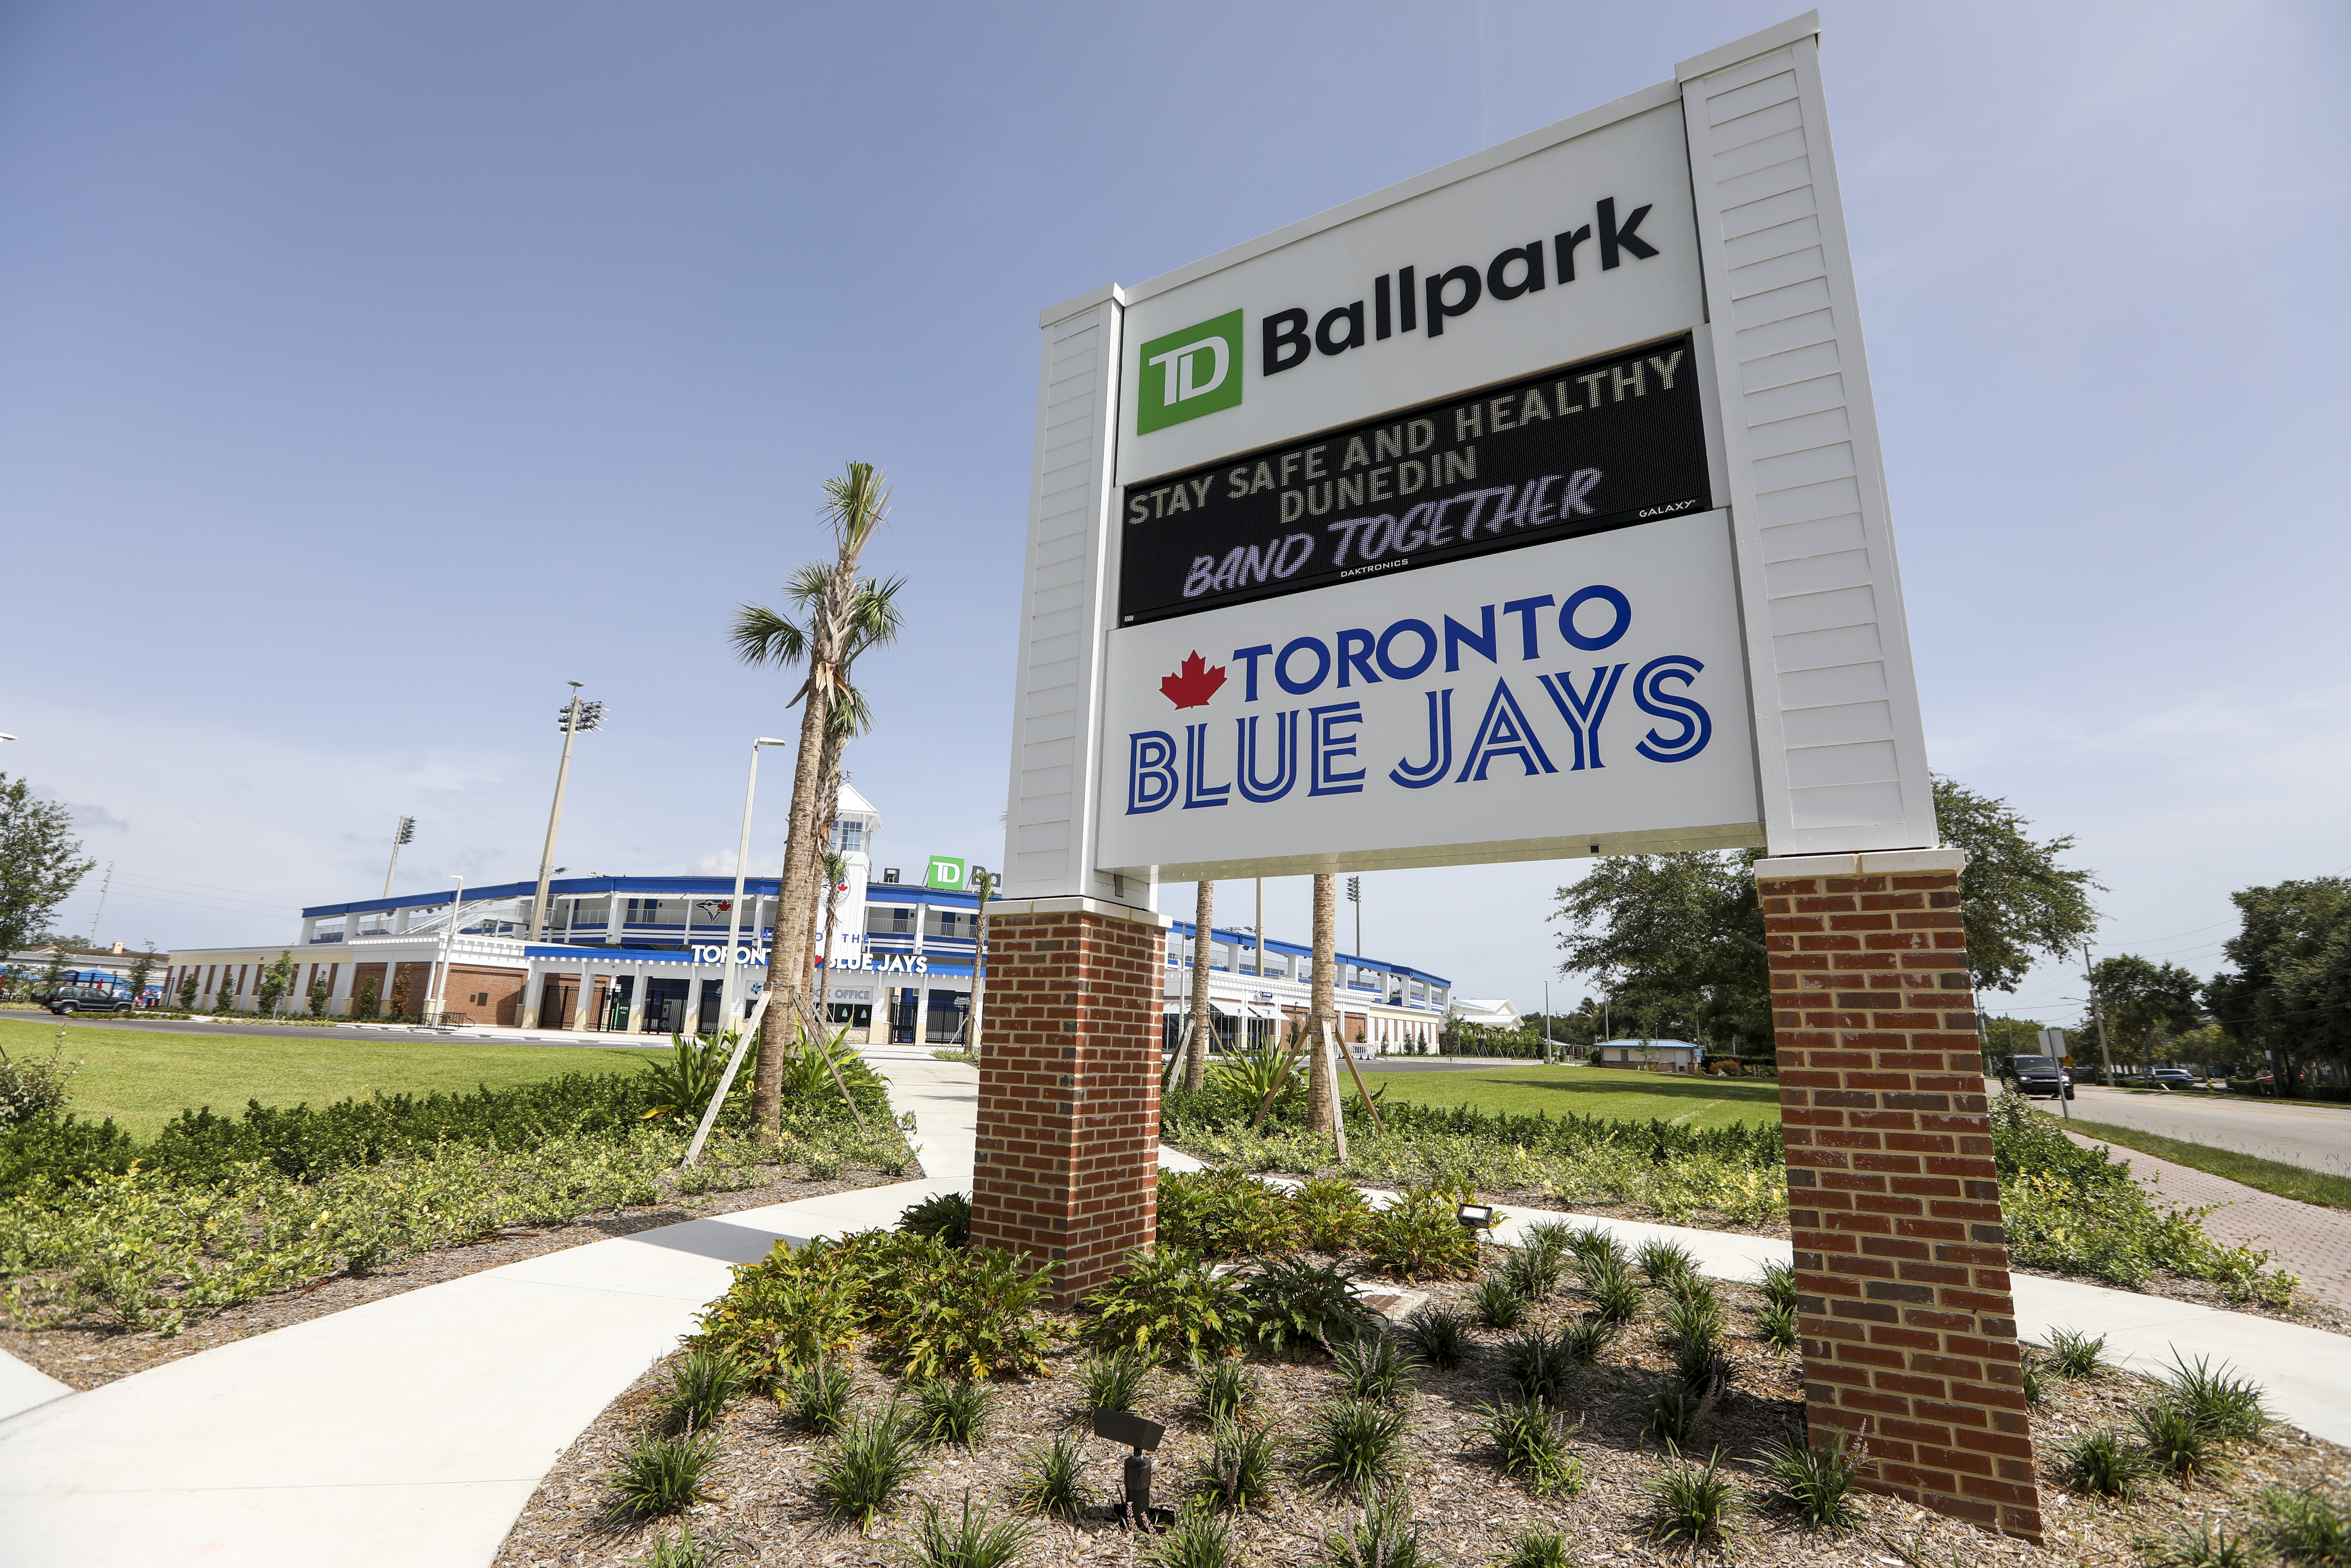 City Of Dunedin Signs Deal With Toronto Blue Jays